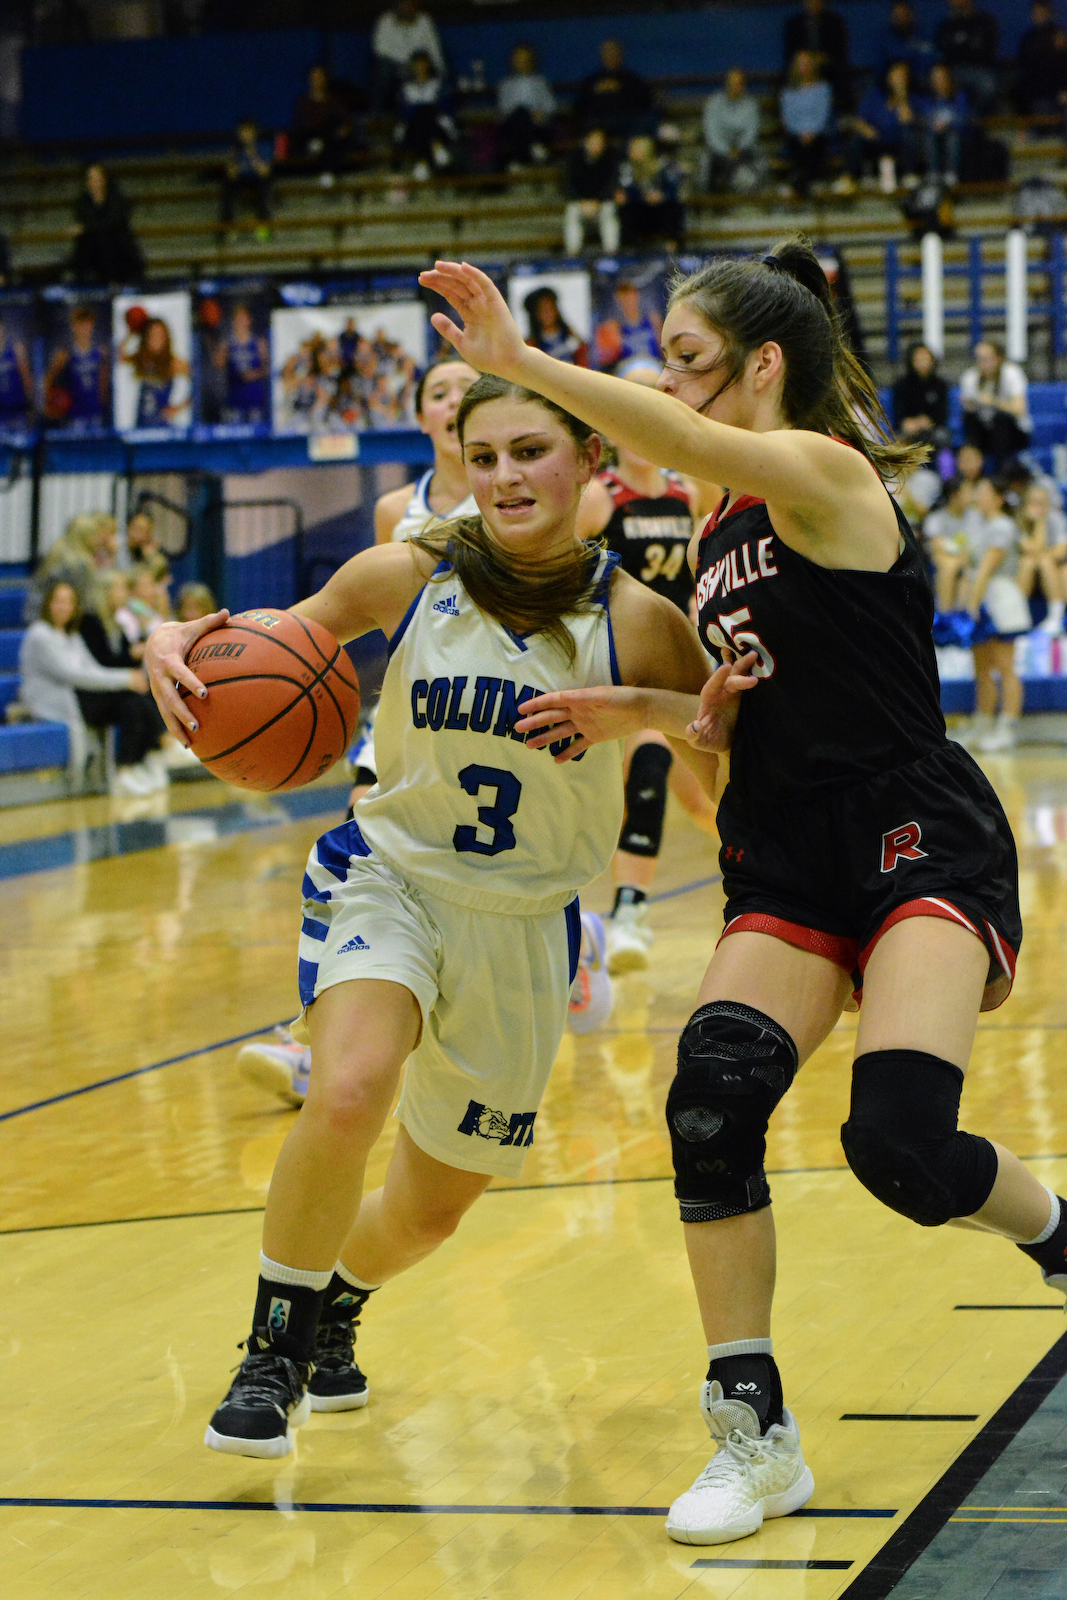 Barker’s three-point barrage propels Bull Dogs past Rushville cover photo